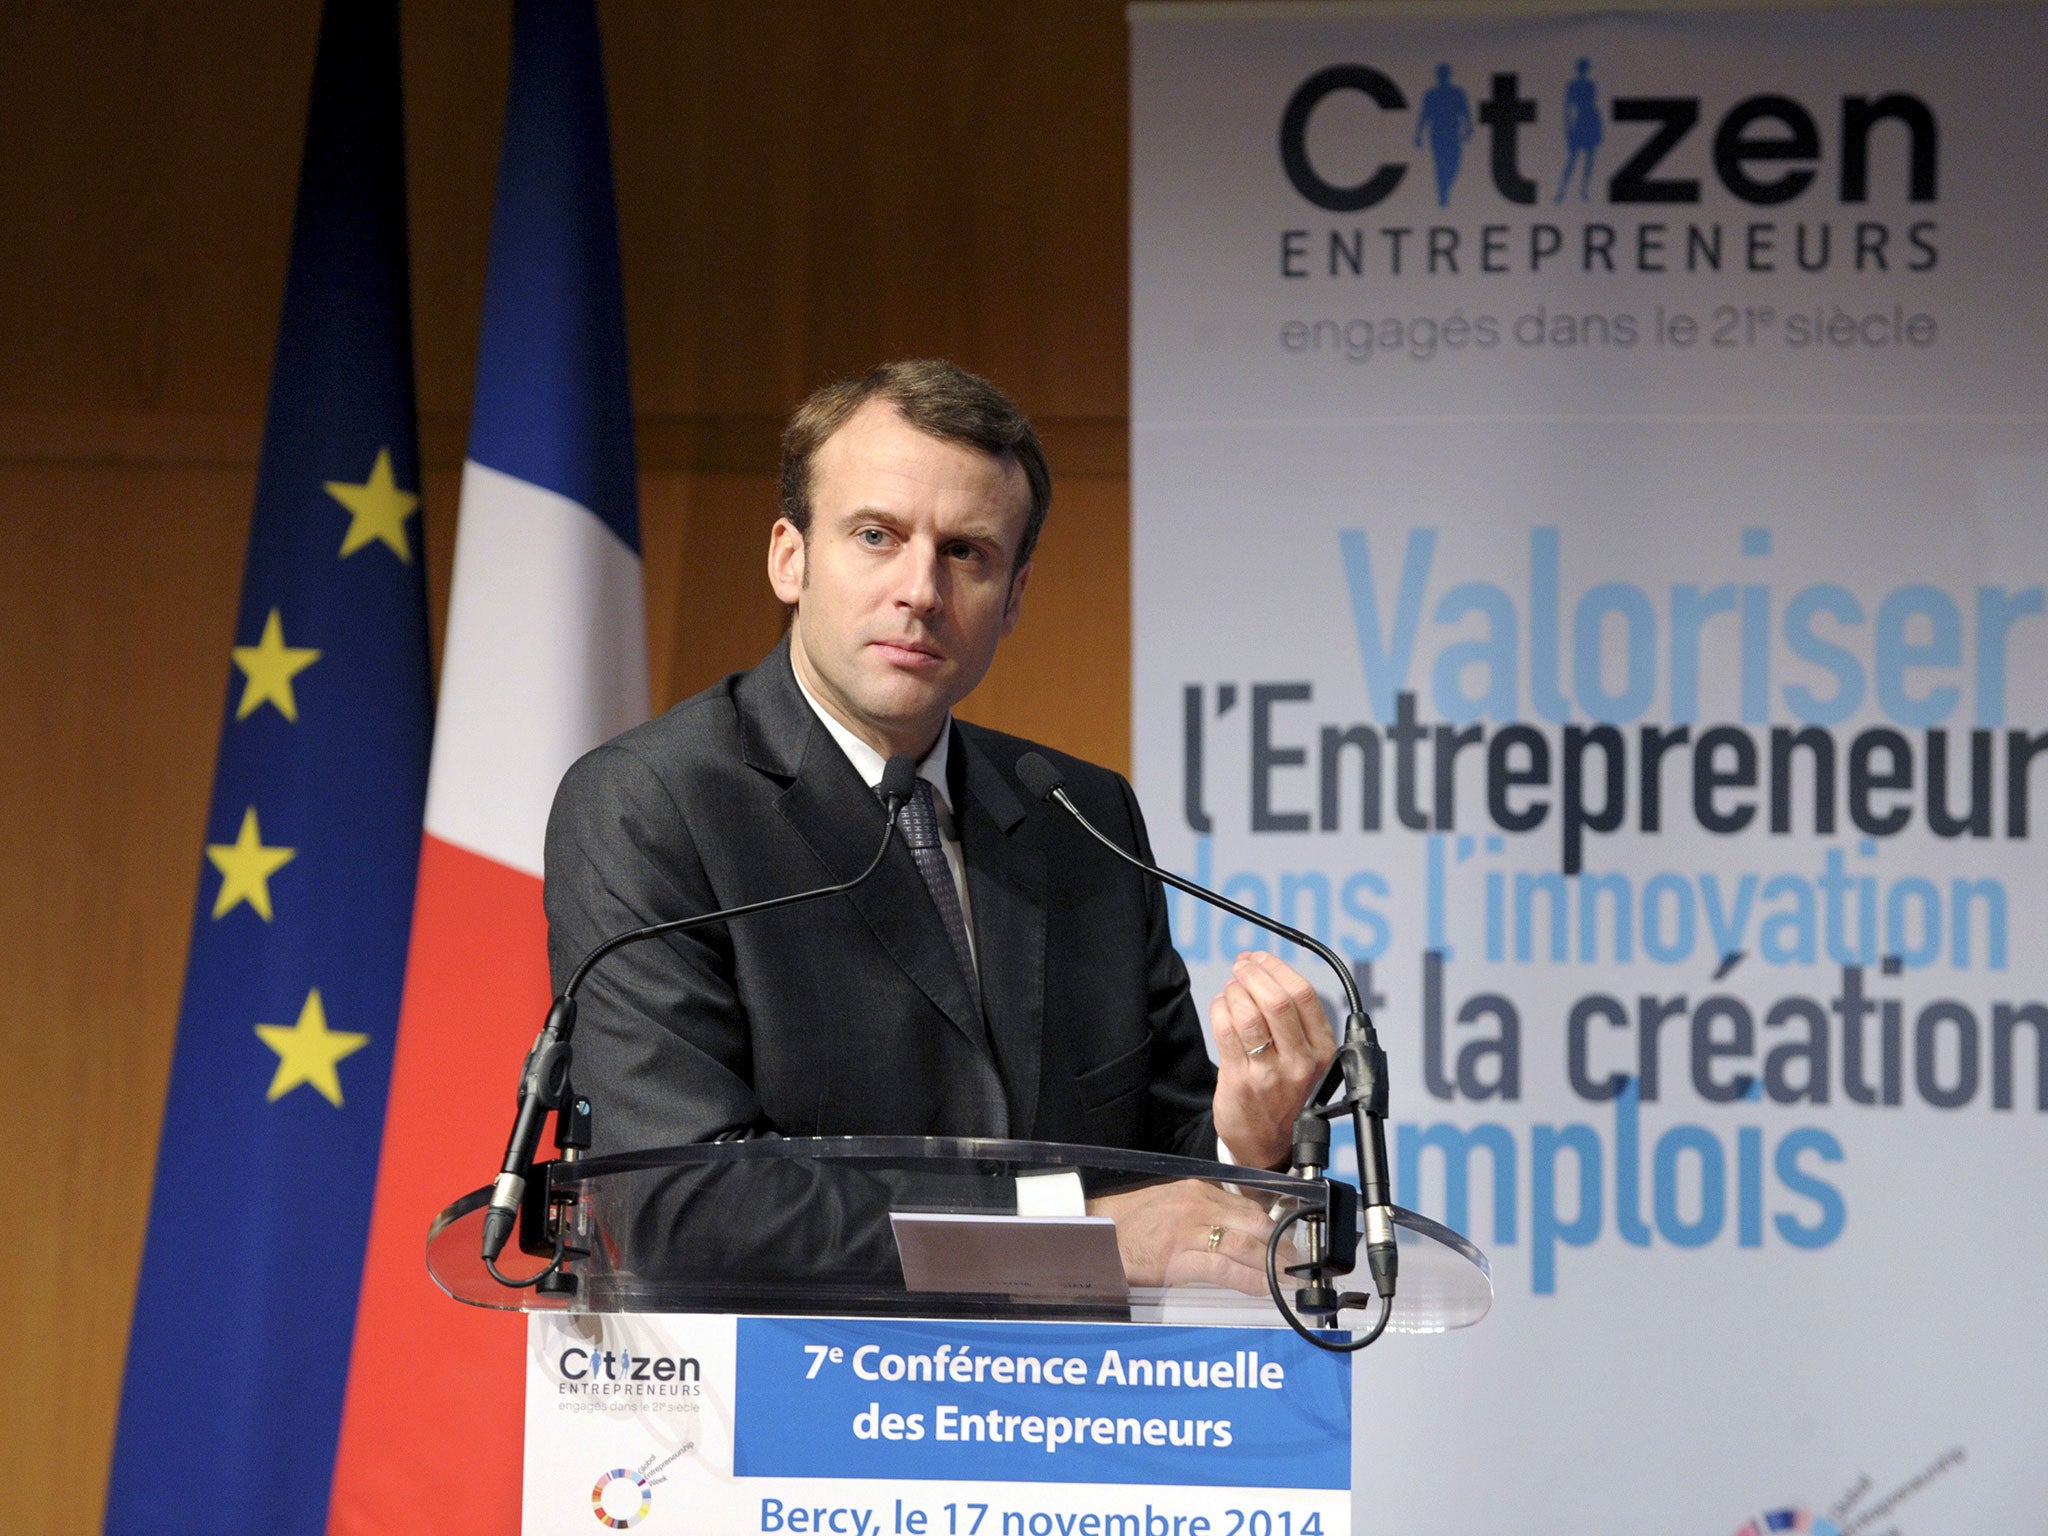 Emmanuel Macron said Europe should deploy some €50bn from the European Stability Mechanism (ESM) to invest in a host of productivity-enhancing capital investment projects, which would help lift the eurozone out of its present economic stupor